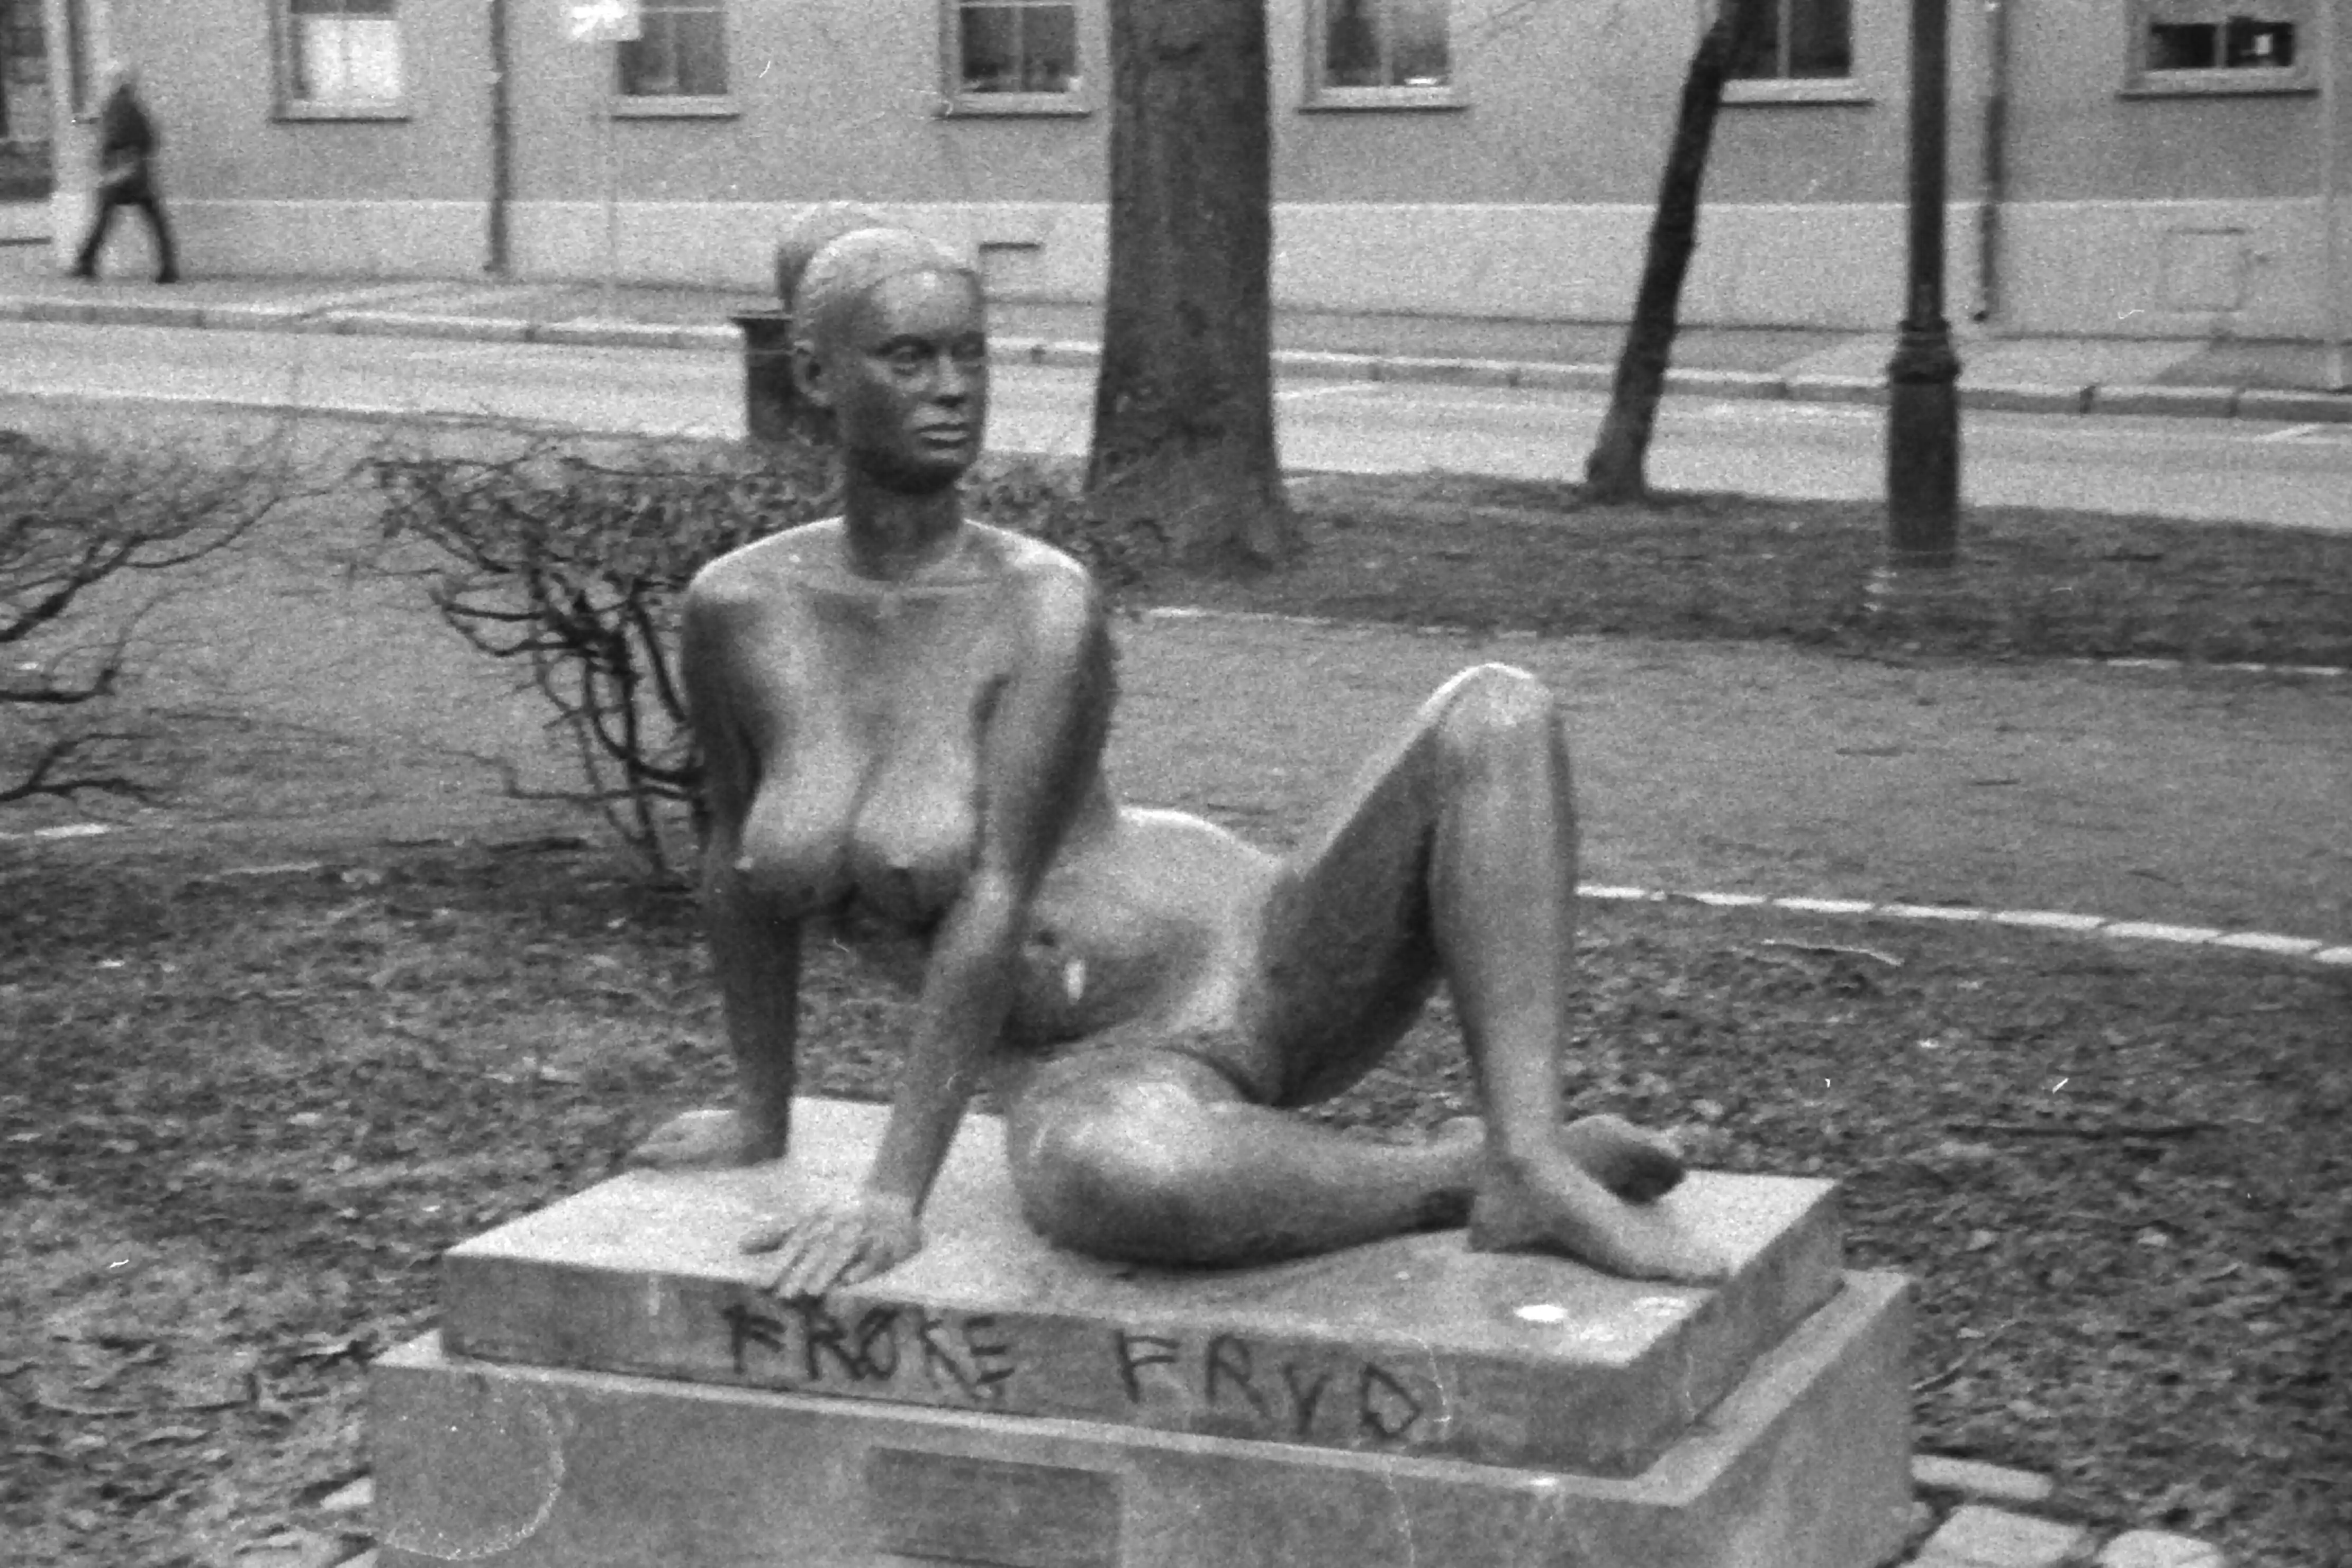 Black and white picture of a naked statue of a woman laying down. The text “Frøke Fryd” is tagged on the foundation of the statue